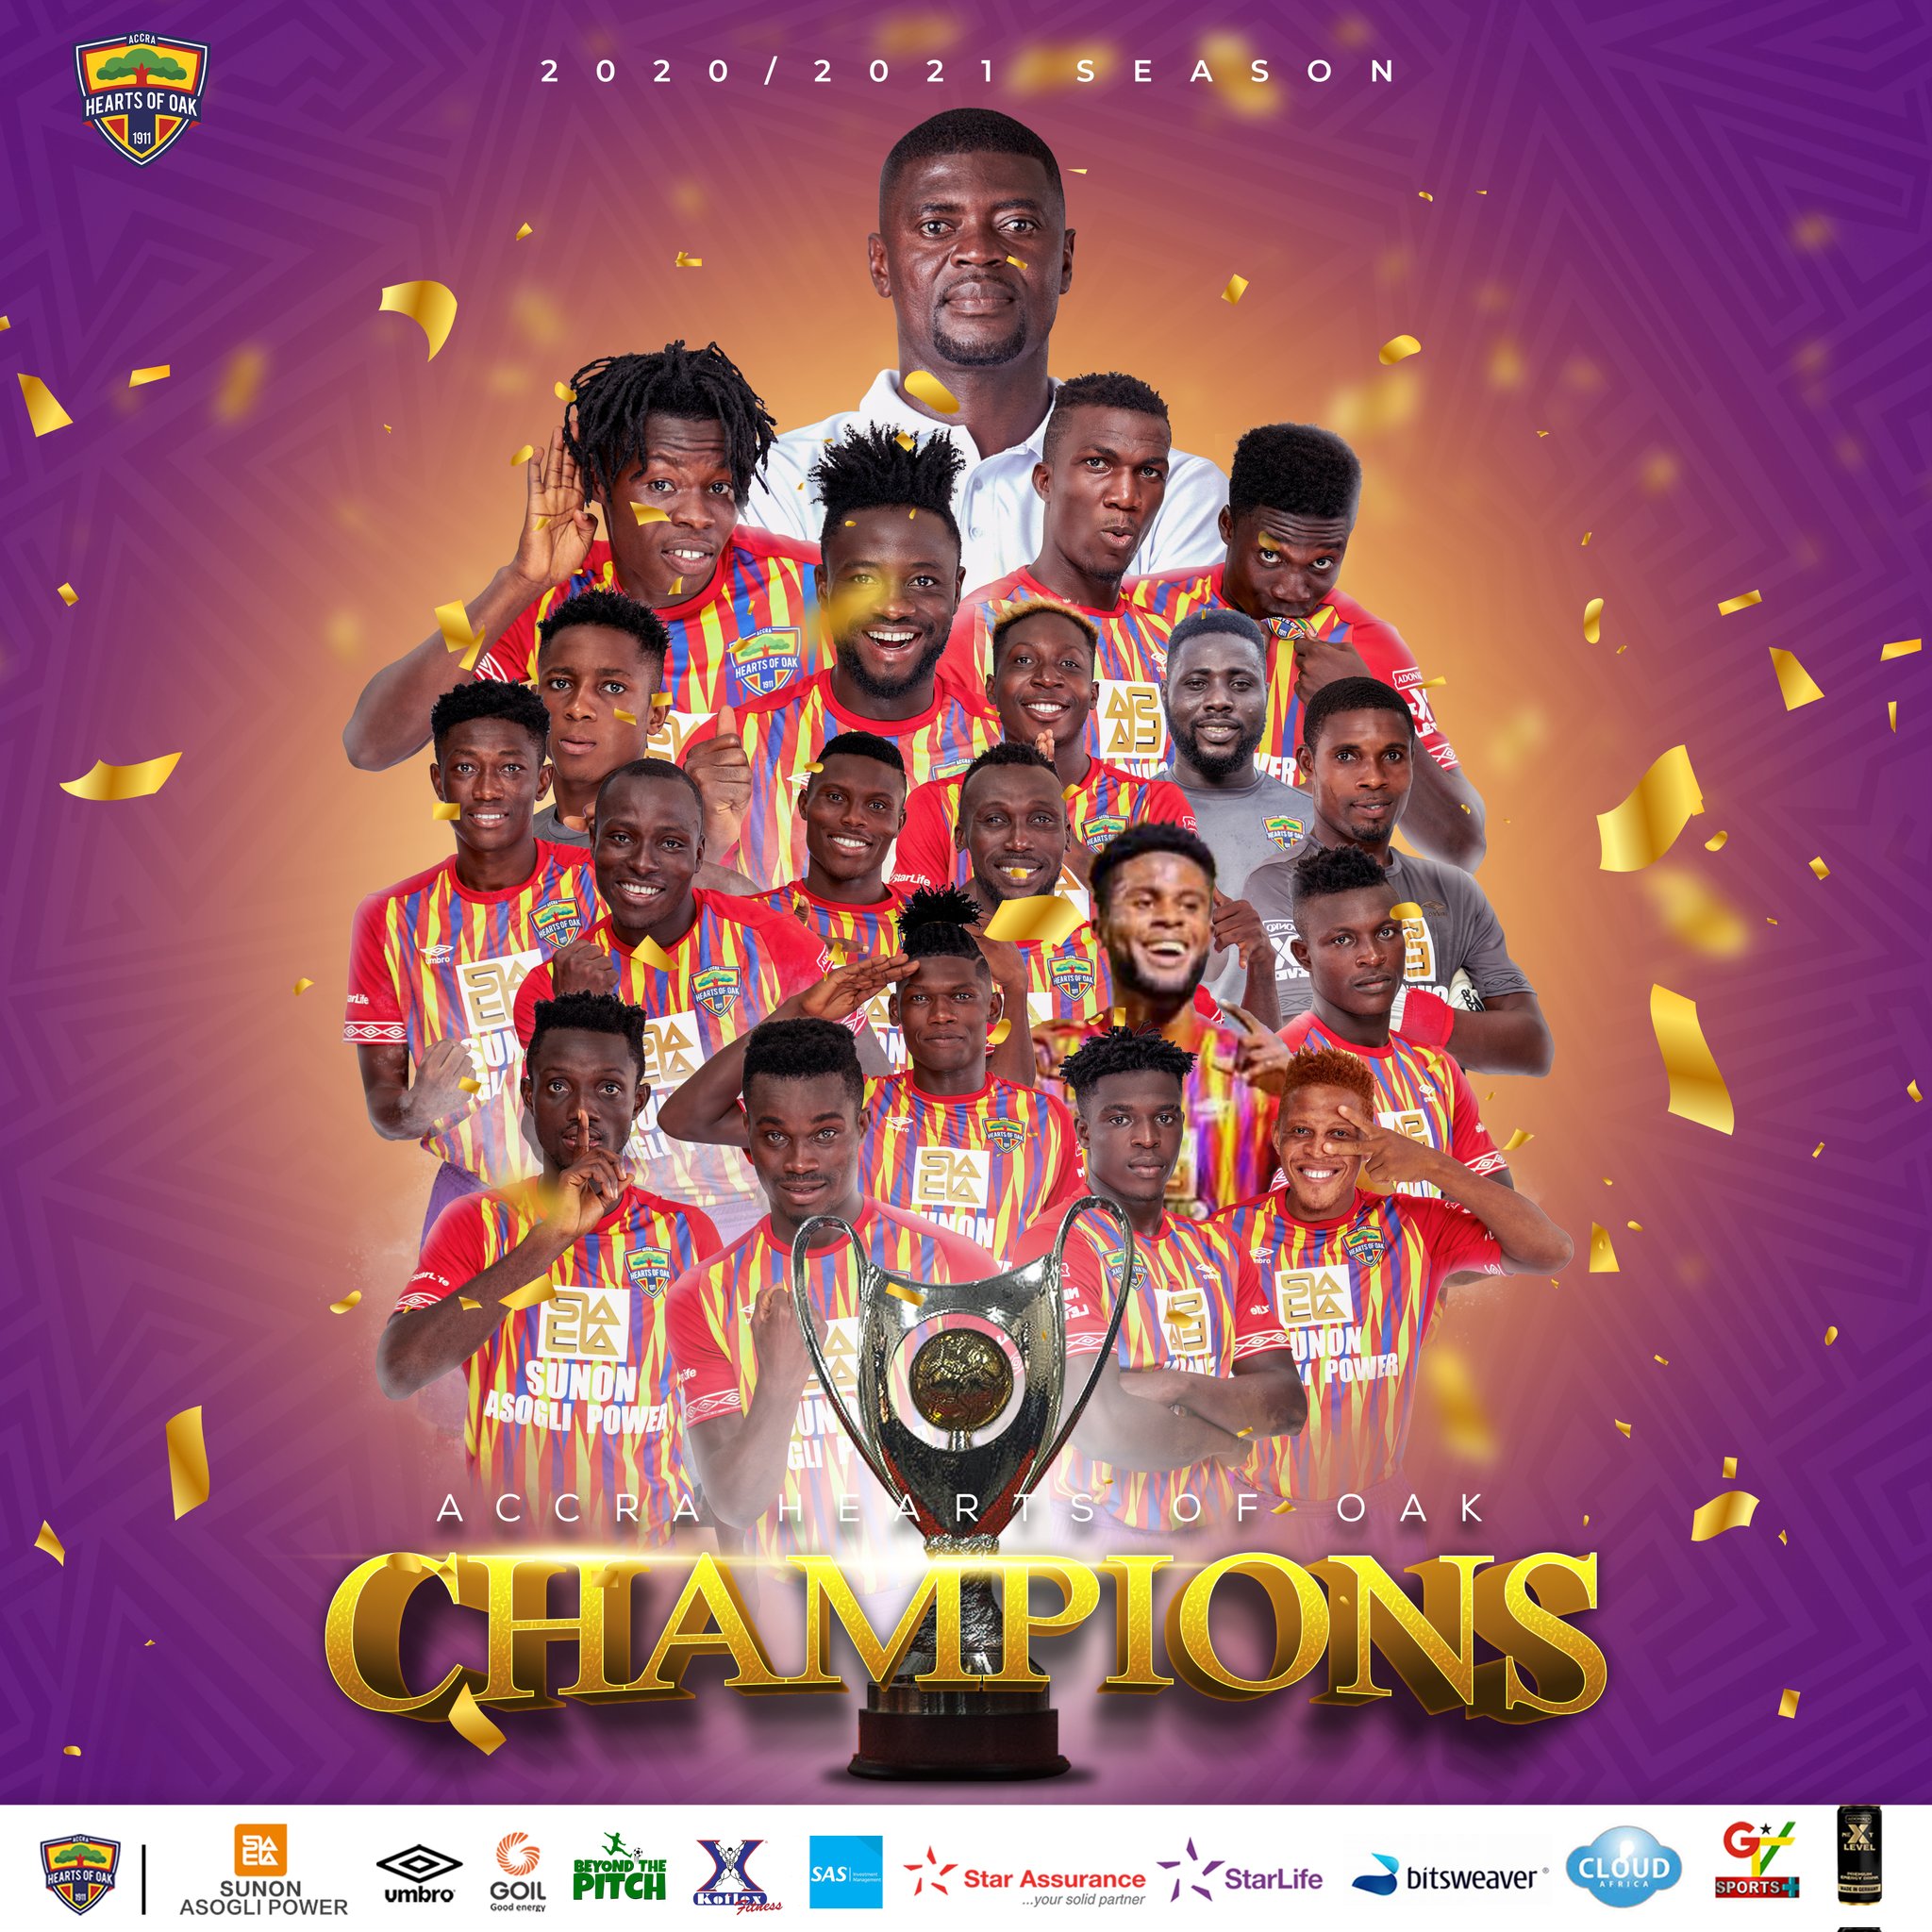 Accra Hearts of Oak's program outline for their league victory celebration released